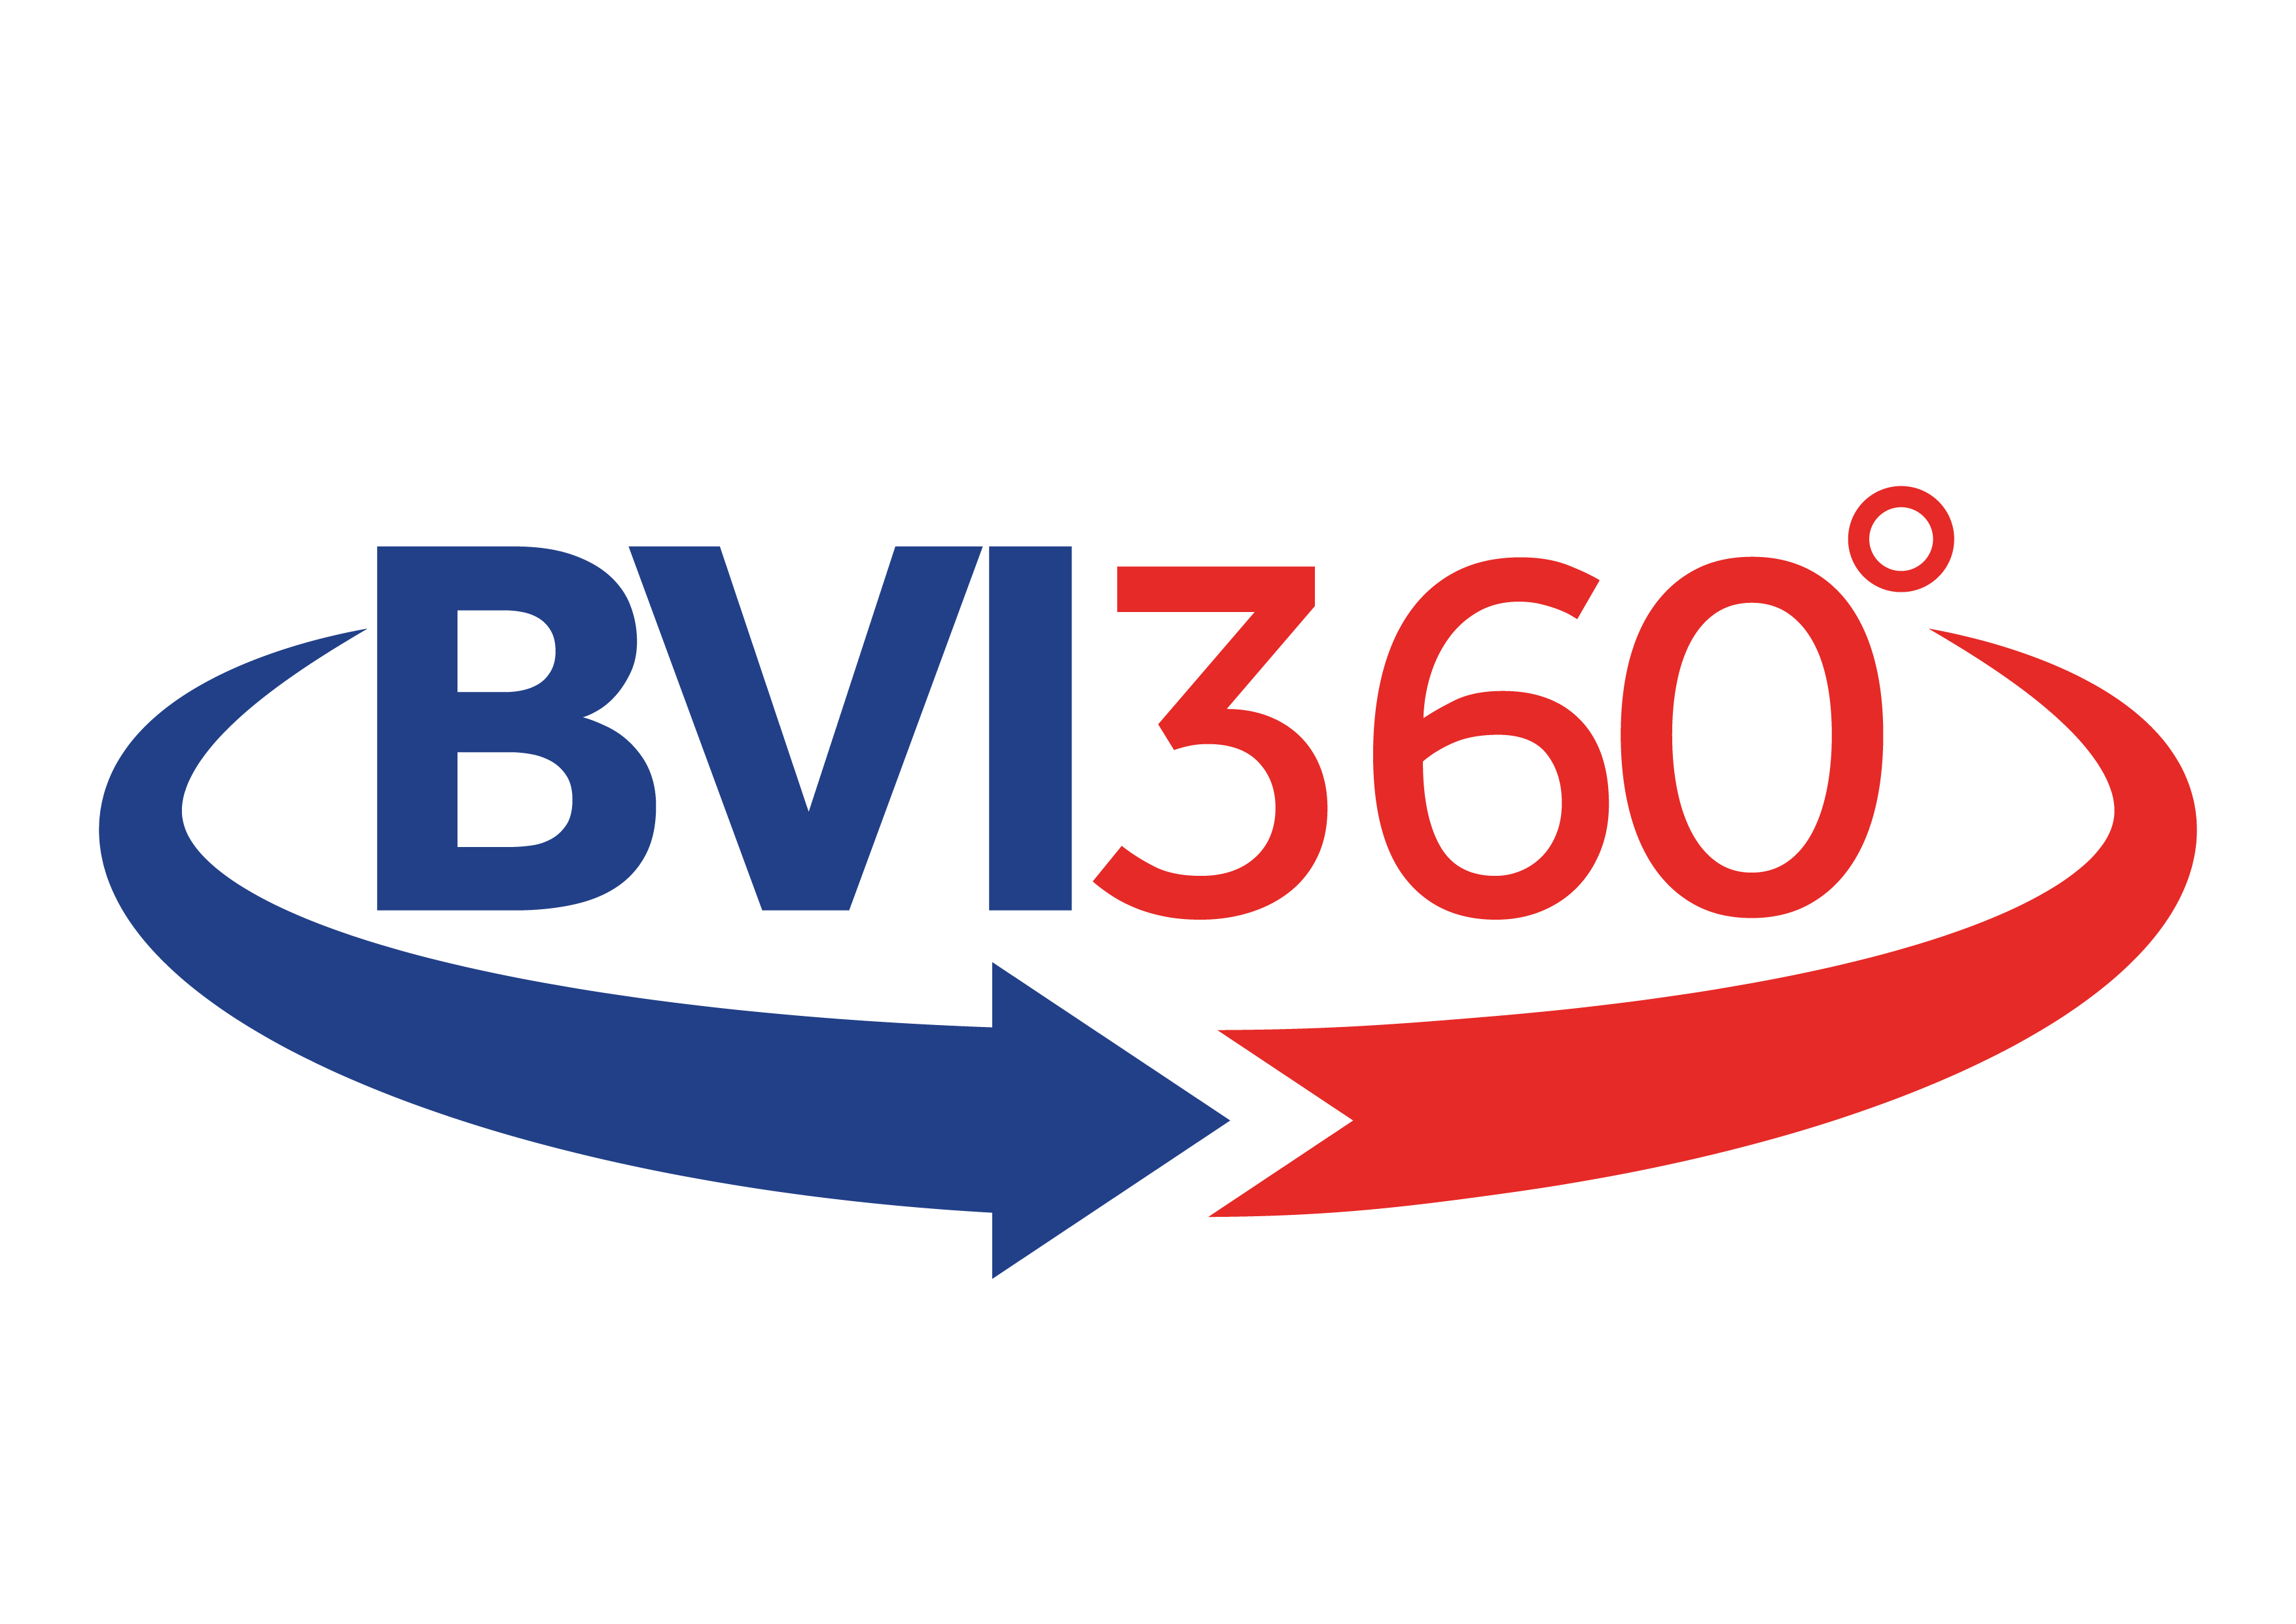 BVI FINANCE LAUNCHES BVI360 CONTENT SERIES TO SHOWCASE FINANCIAL SERVICES INDUSTRY